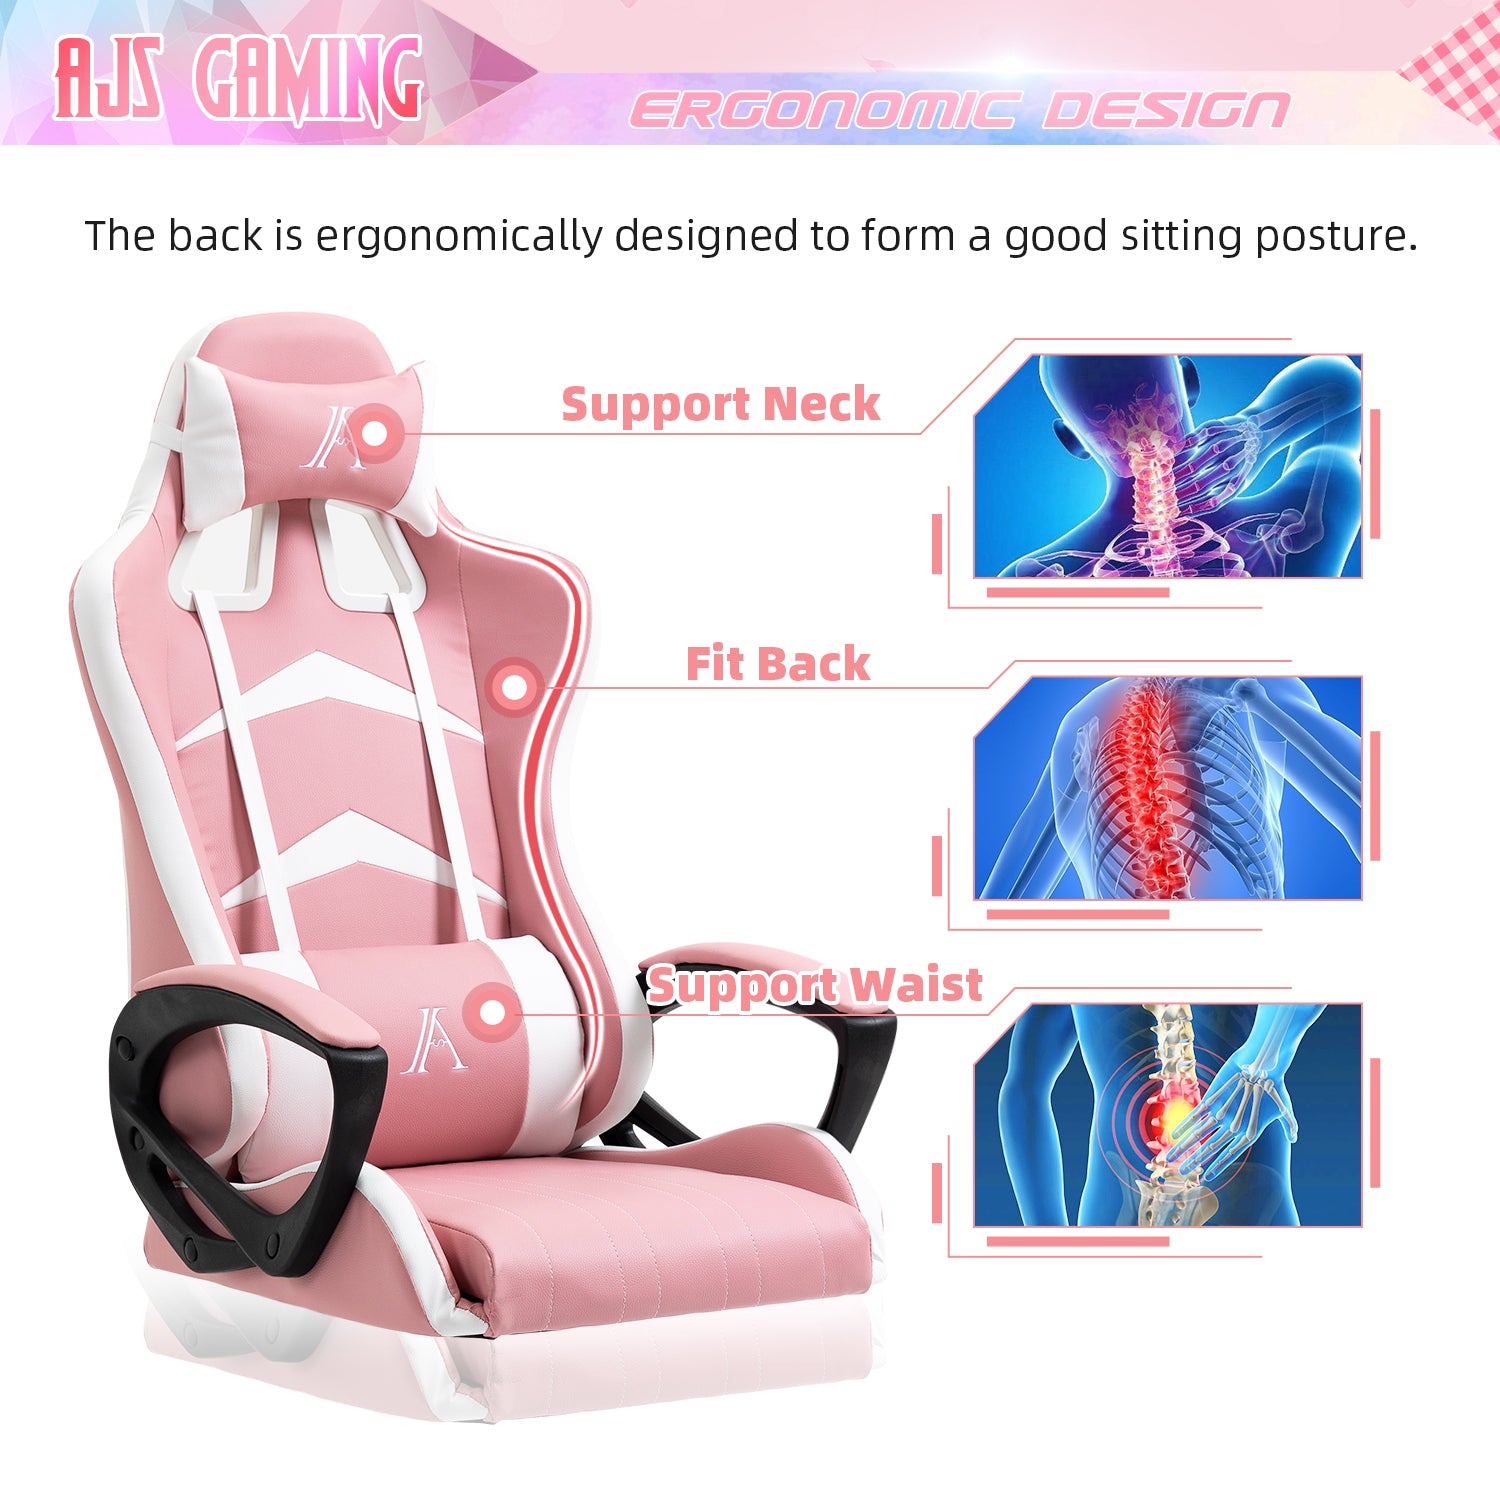 YAMASORO Pink Gaming Chair,High Back Ergonomic Racing Office Chair, Leather Computer Desk Chair Gamer Chair with Headrest and Lumbar Support for Girls Women